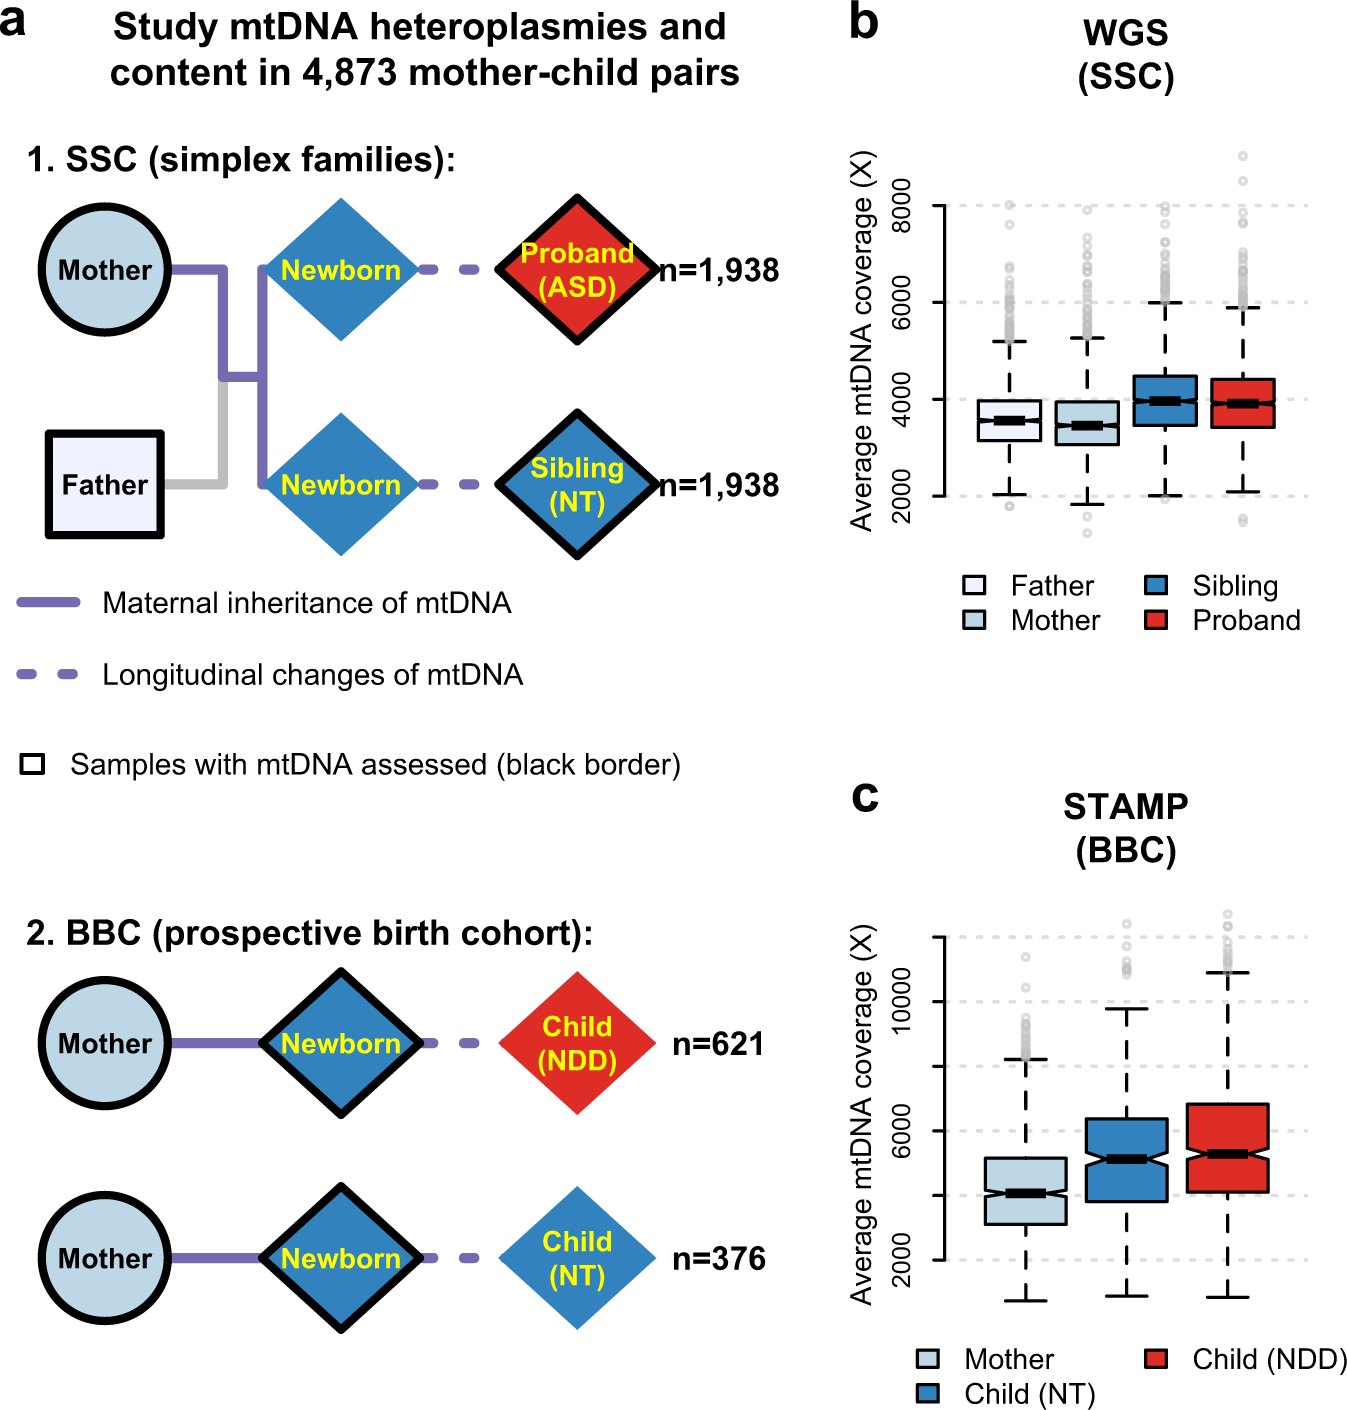 Association of mitochondrial DNA content, heteroplasmies and  inter-generational transmission with autism | Nature Communications